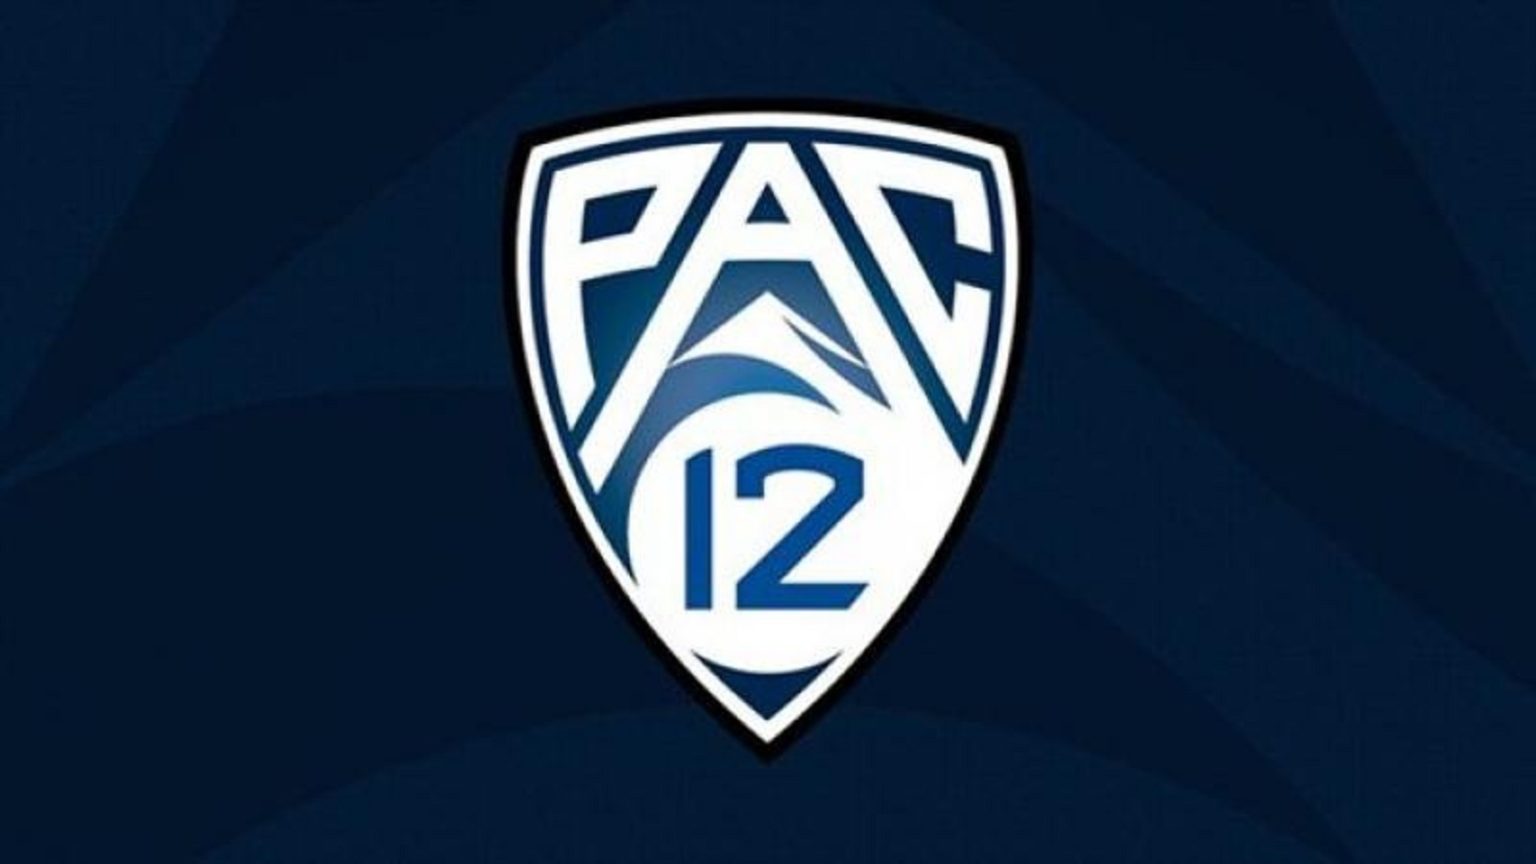 Where does the Pac12 go from here? They want to add schools